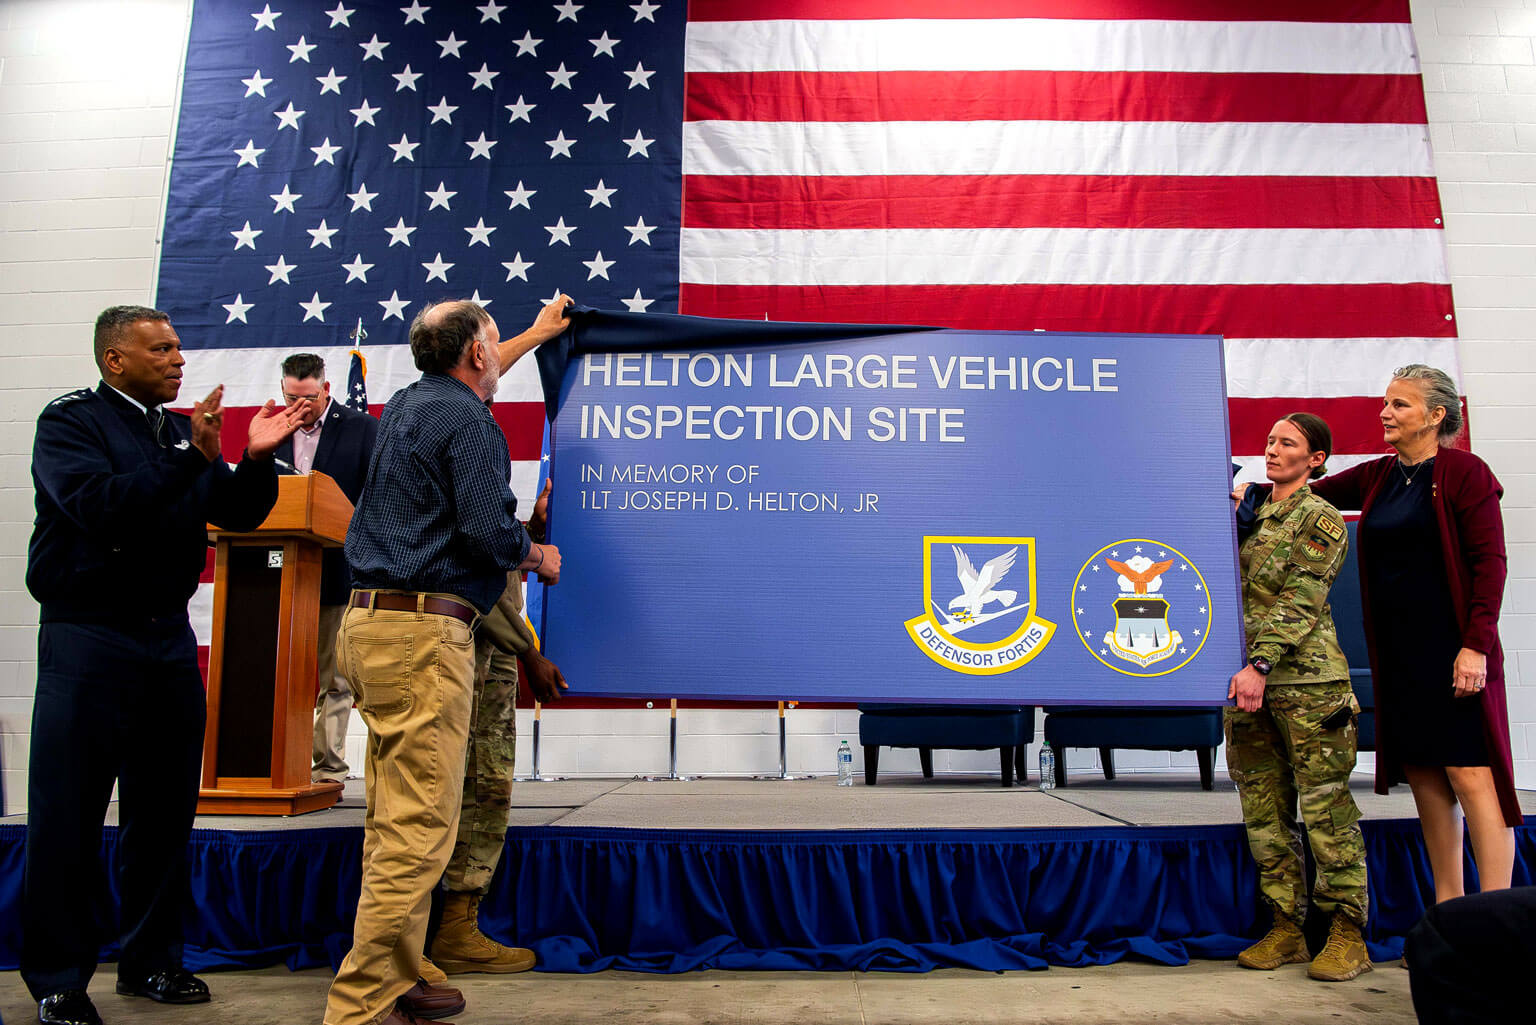 U.S. Air Force Academy Superintendent Lt. Gen. Richard Clark applauds as 1st Lt. Joseph D. Helton Jr.’s mother, Jiffy Helton-Sarver, watches his father, Joseph Helton, and Senior Airman Chelsea McComb unveil the new sign for the Large Vehicle Inspection Site.